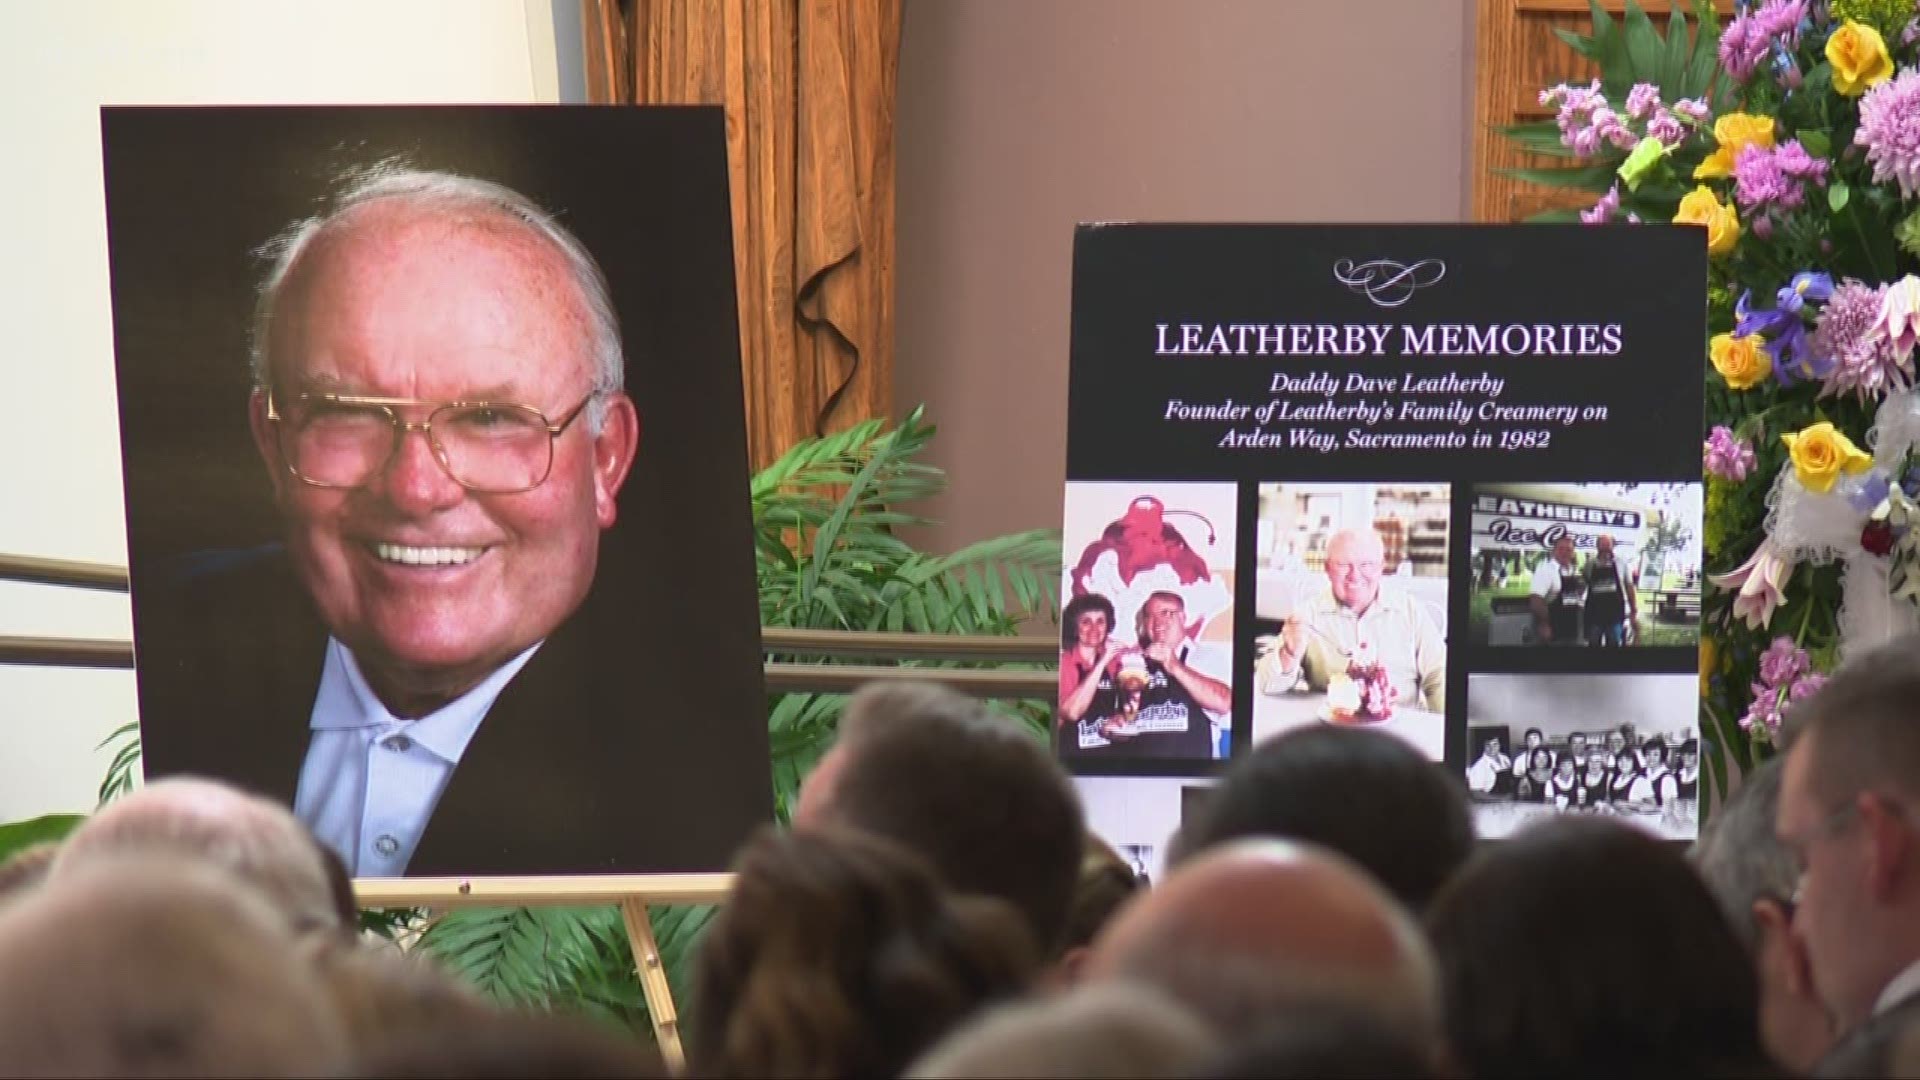 Family, friends, and members of the community filled Our Lady of Assumption parish, Monday morning, to celebrate the life of Dave Leatherby, known to the community as “Daddy Dave,” the founder of Leatherby's Family Creamery.